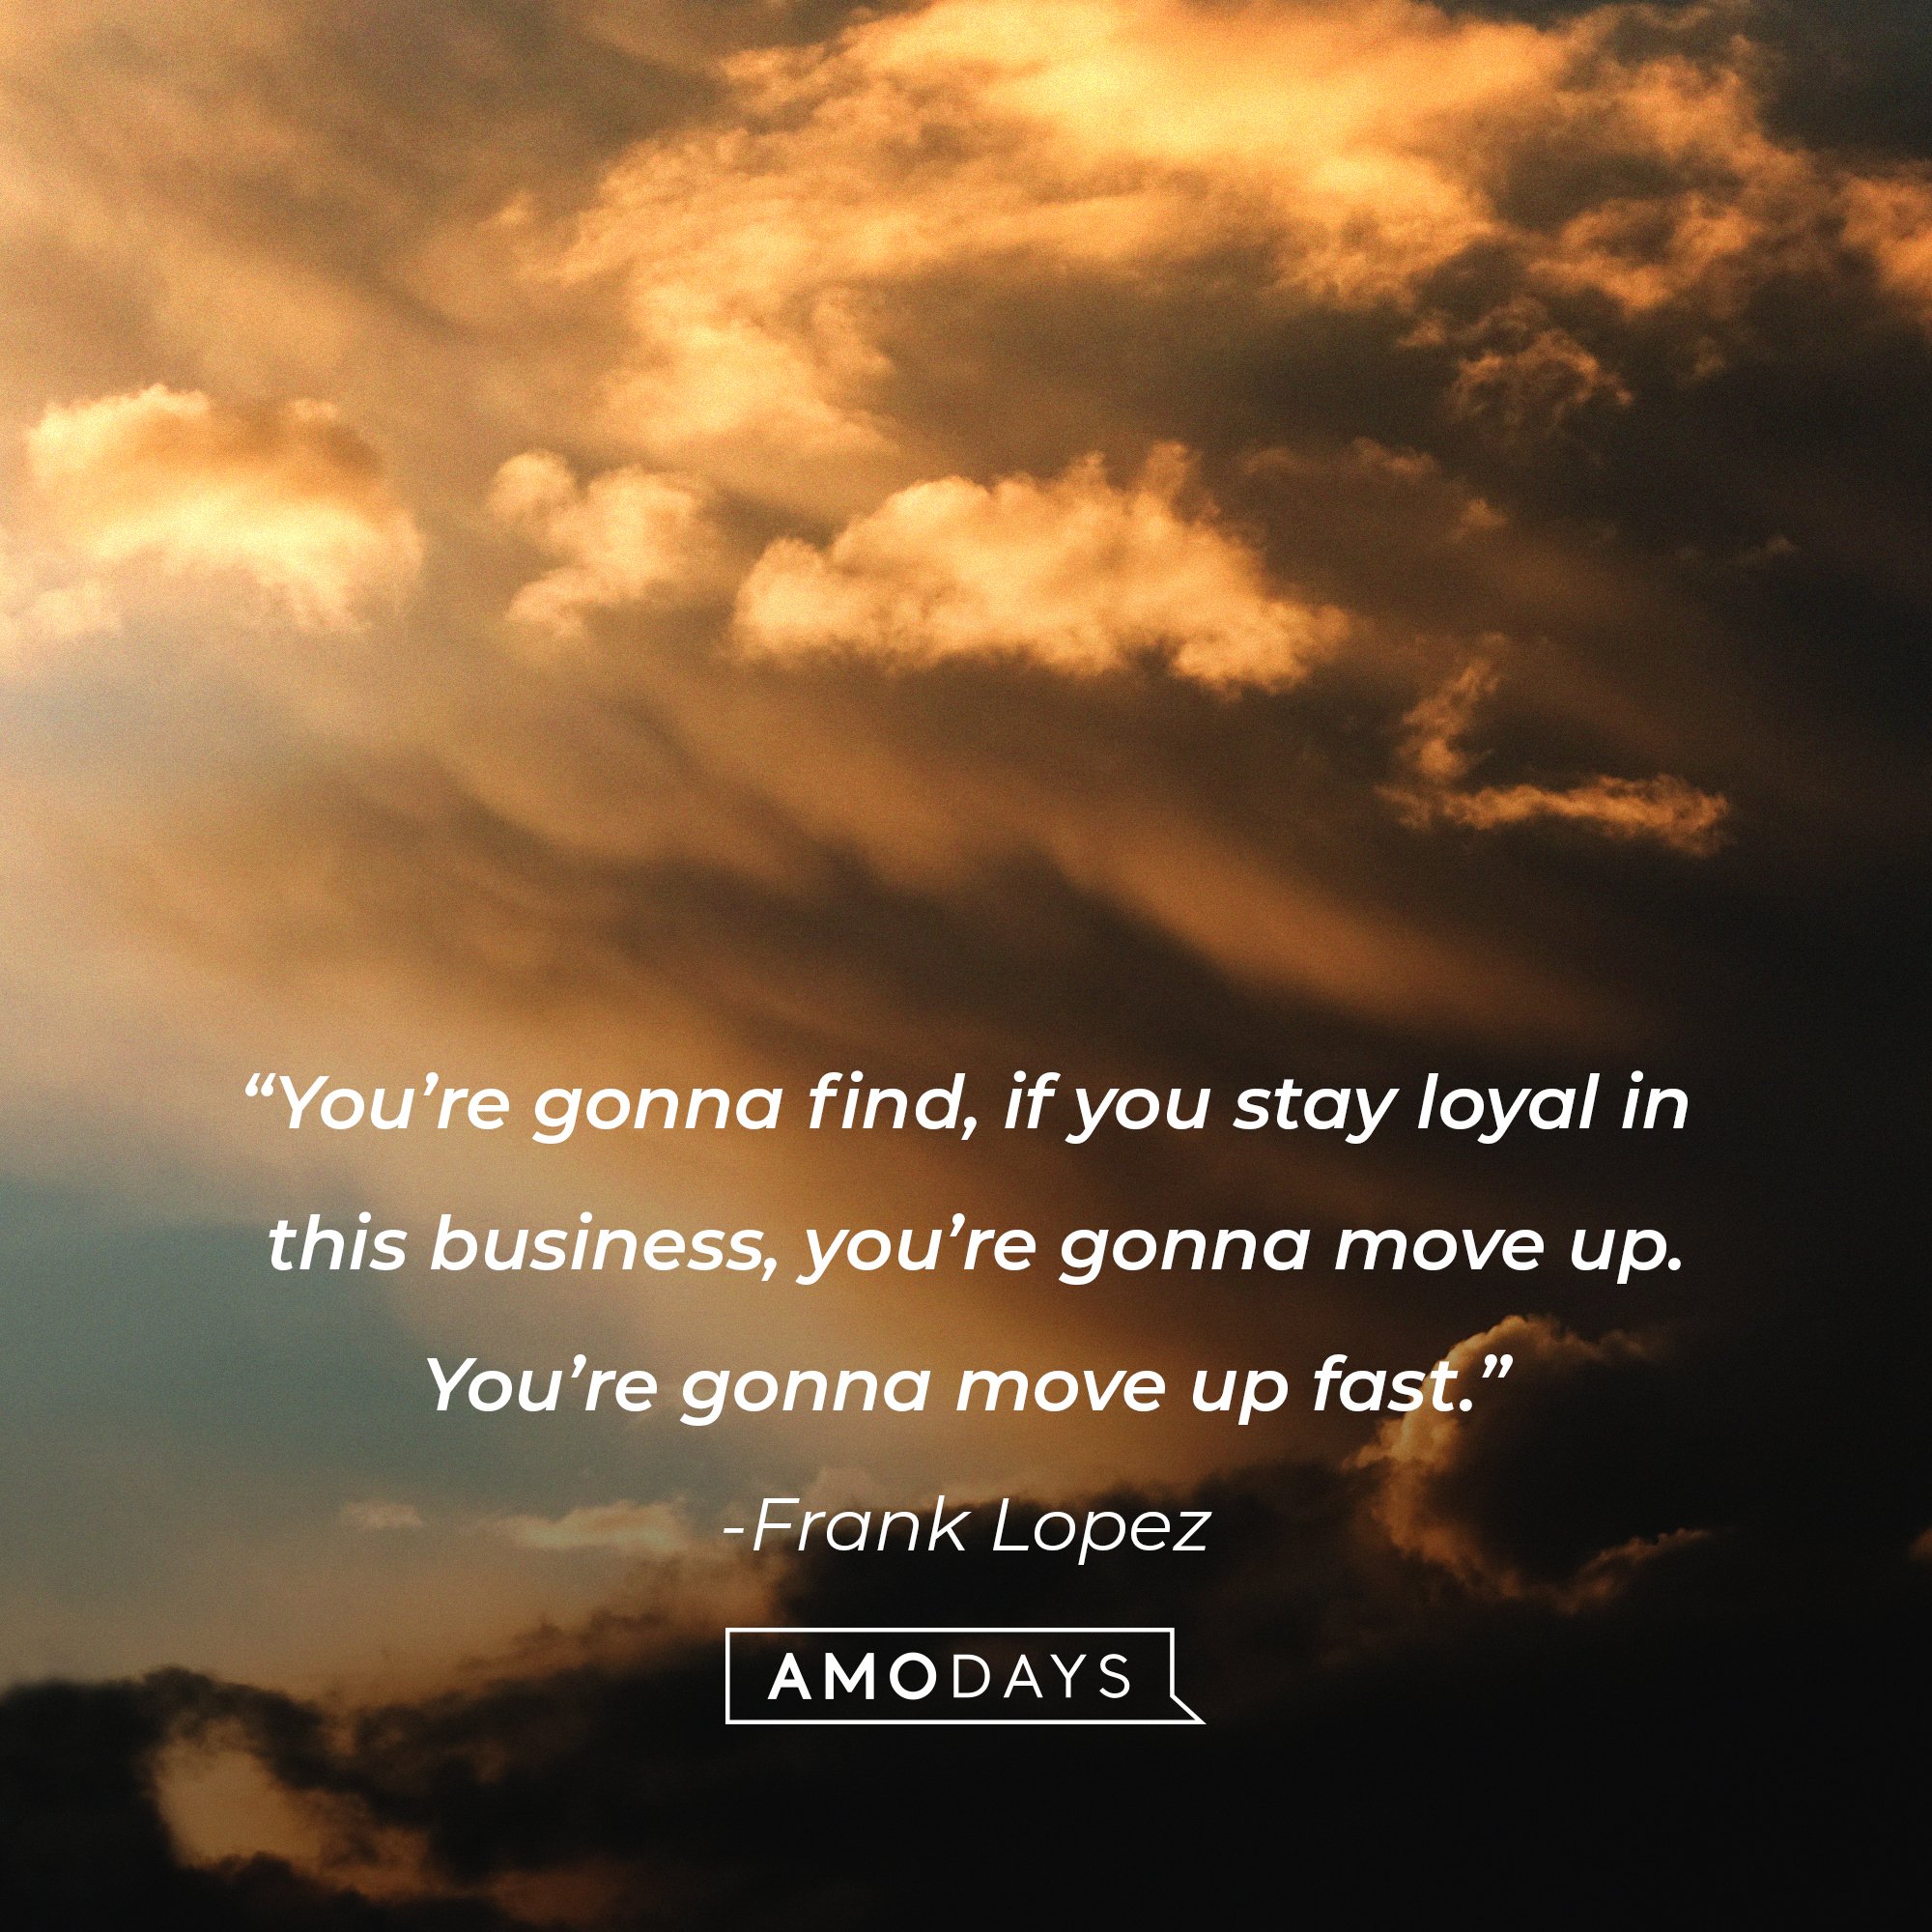 Frank Lopez’ quote: “You’re gonna find; if you stay loyal in this business, you’re gonna move up. You’re gonna move up fast.”  | Image: Amodays